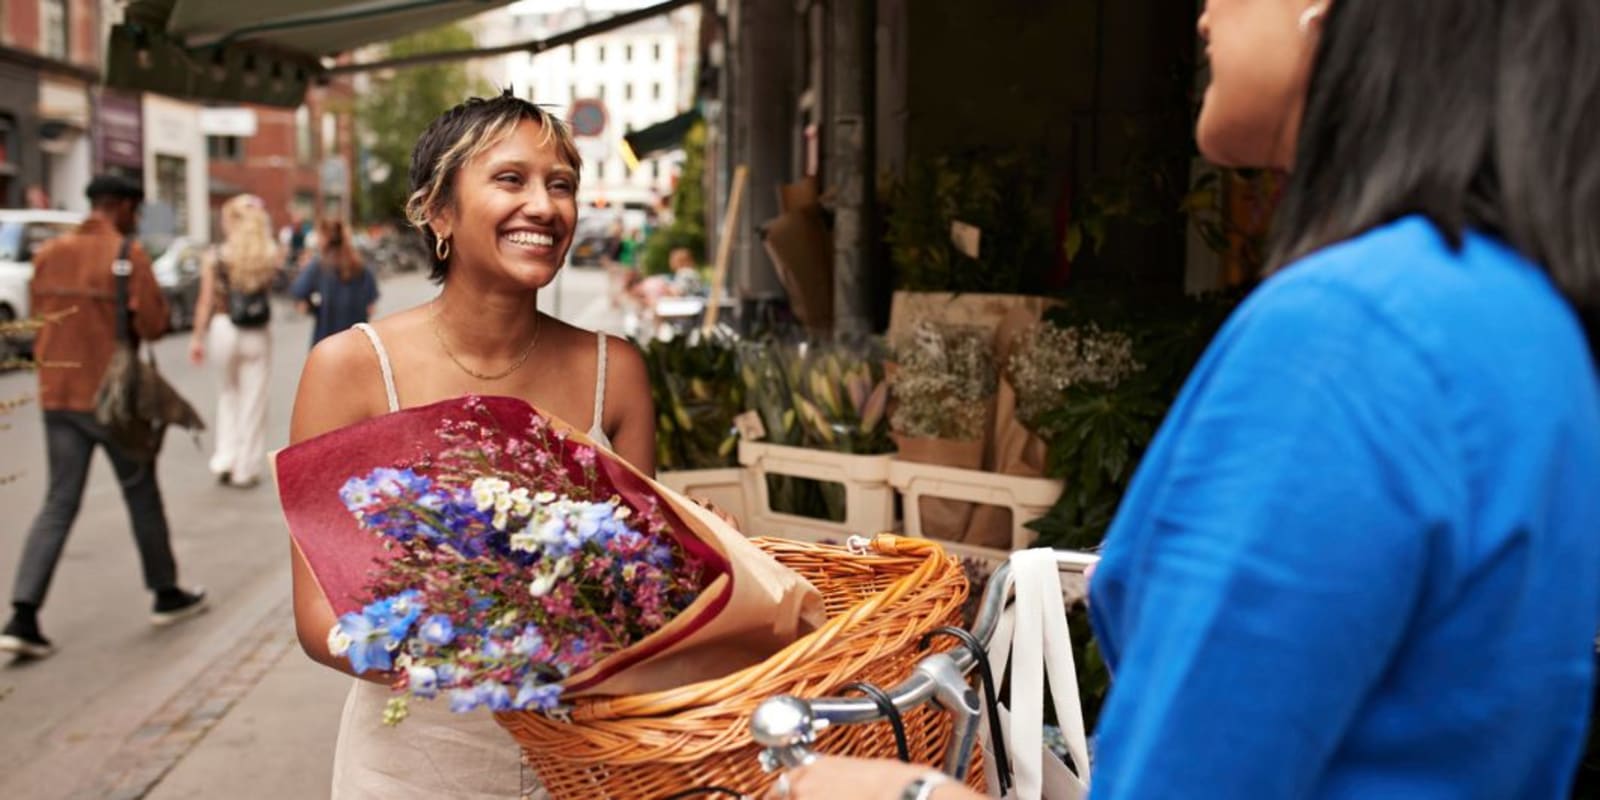 A person buying flowers from a street market